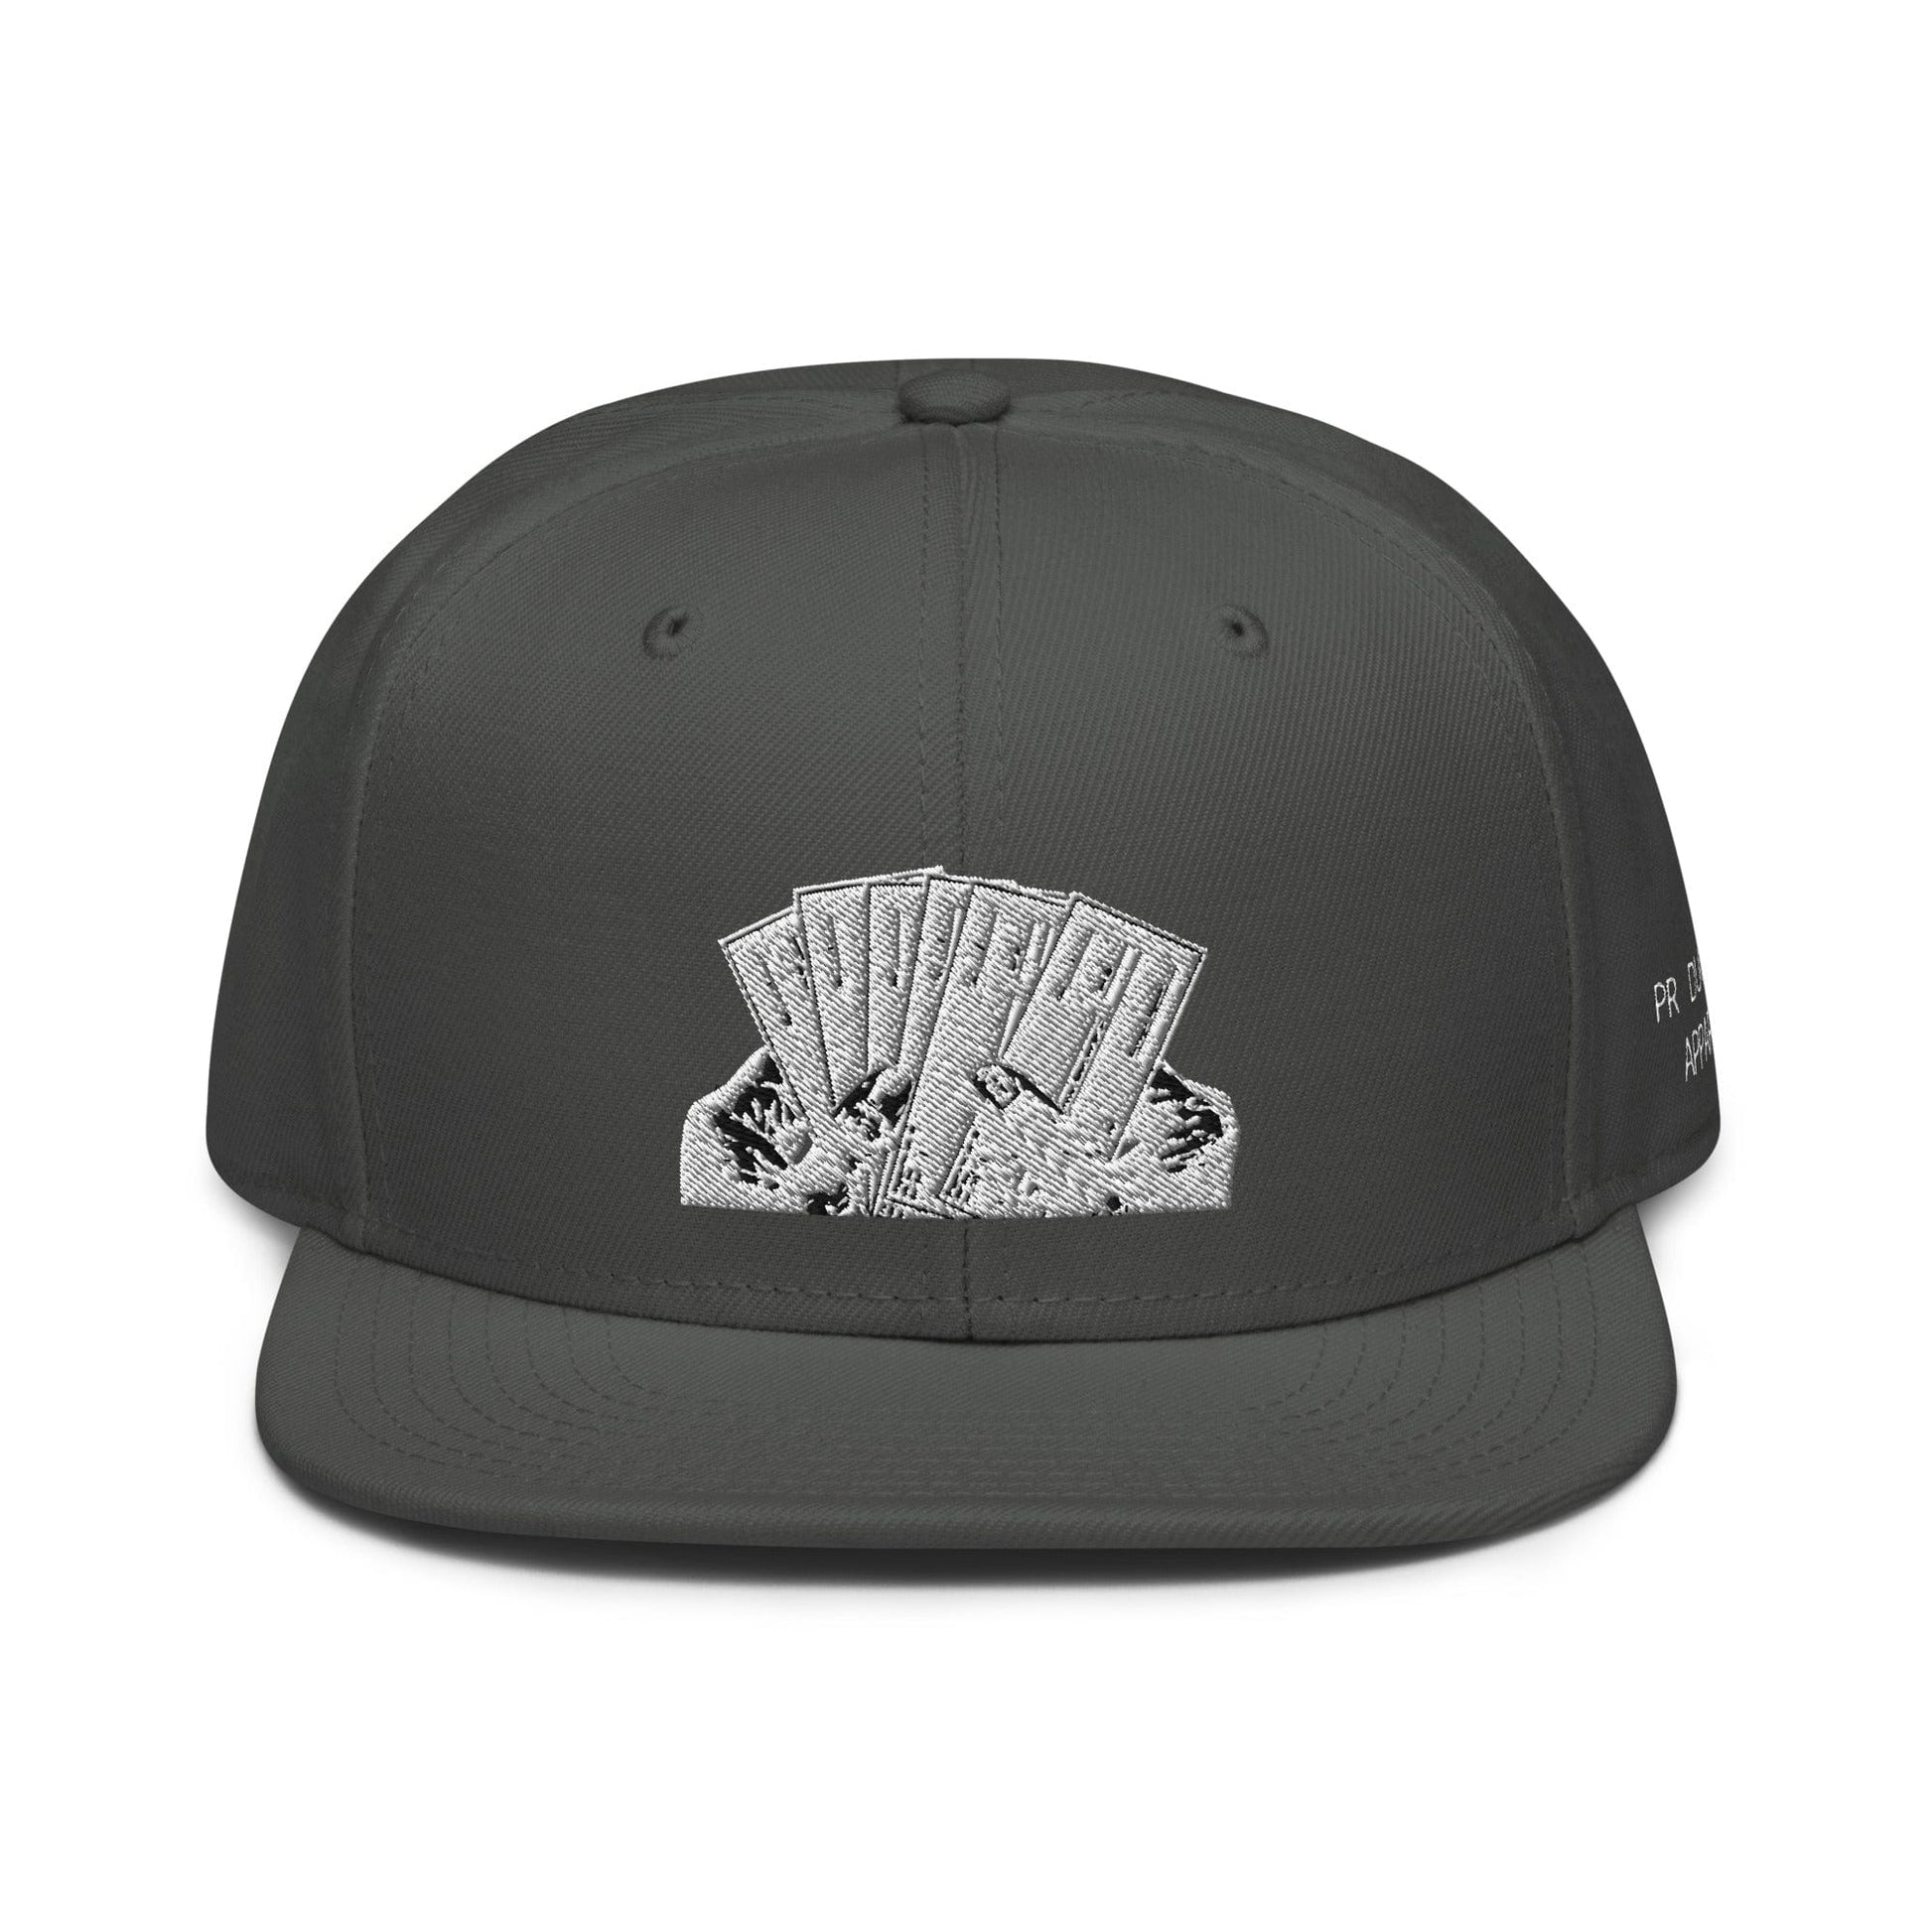 Production Apparel Paycheck Poker Hat Charcoal gray